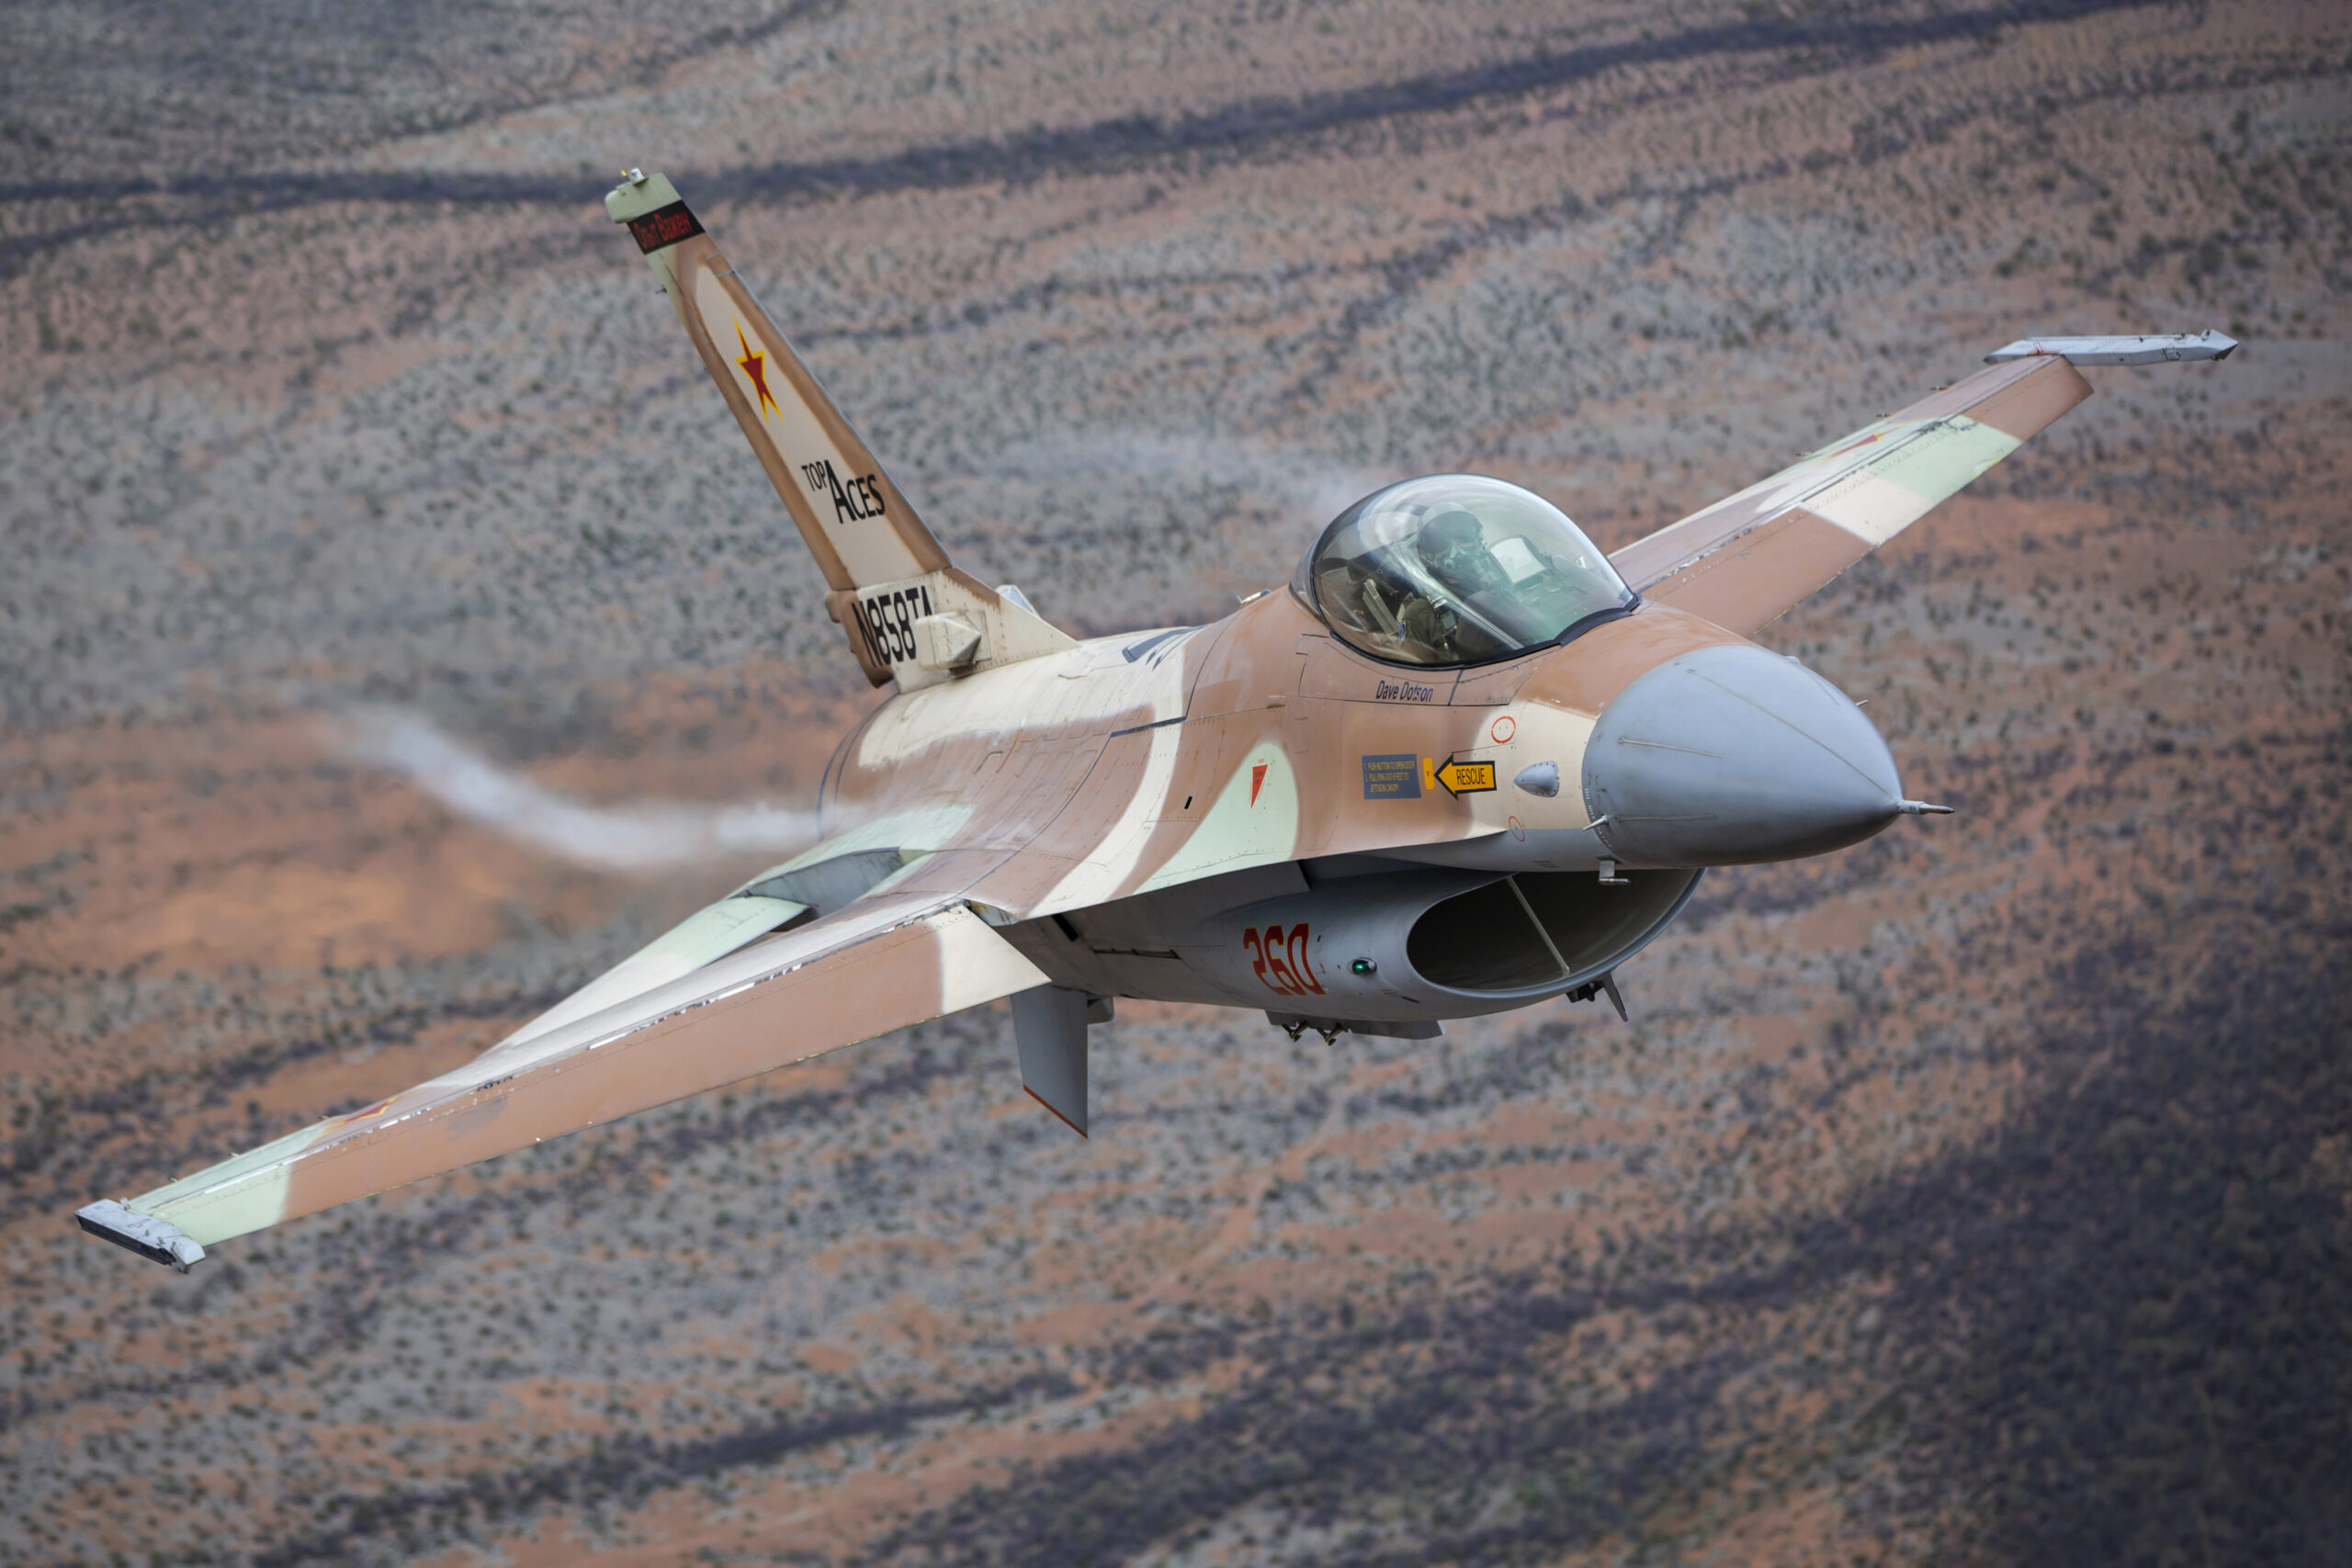 Top Aces: Revolutionizing Air Combat Training with Elite Expertise and Next-Generation Technology